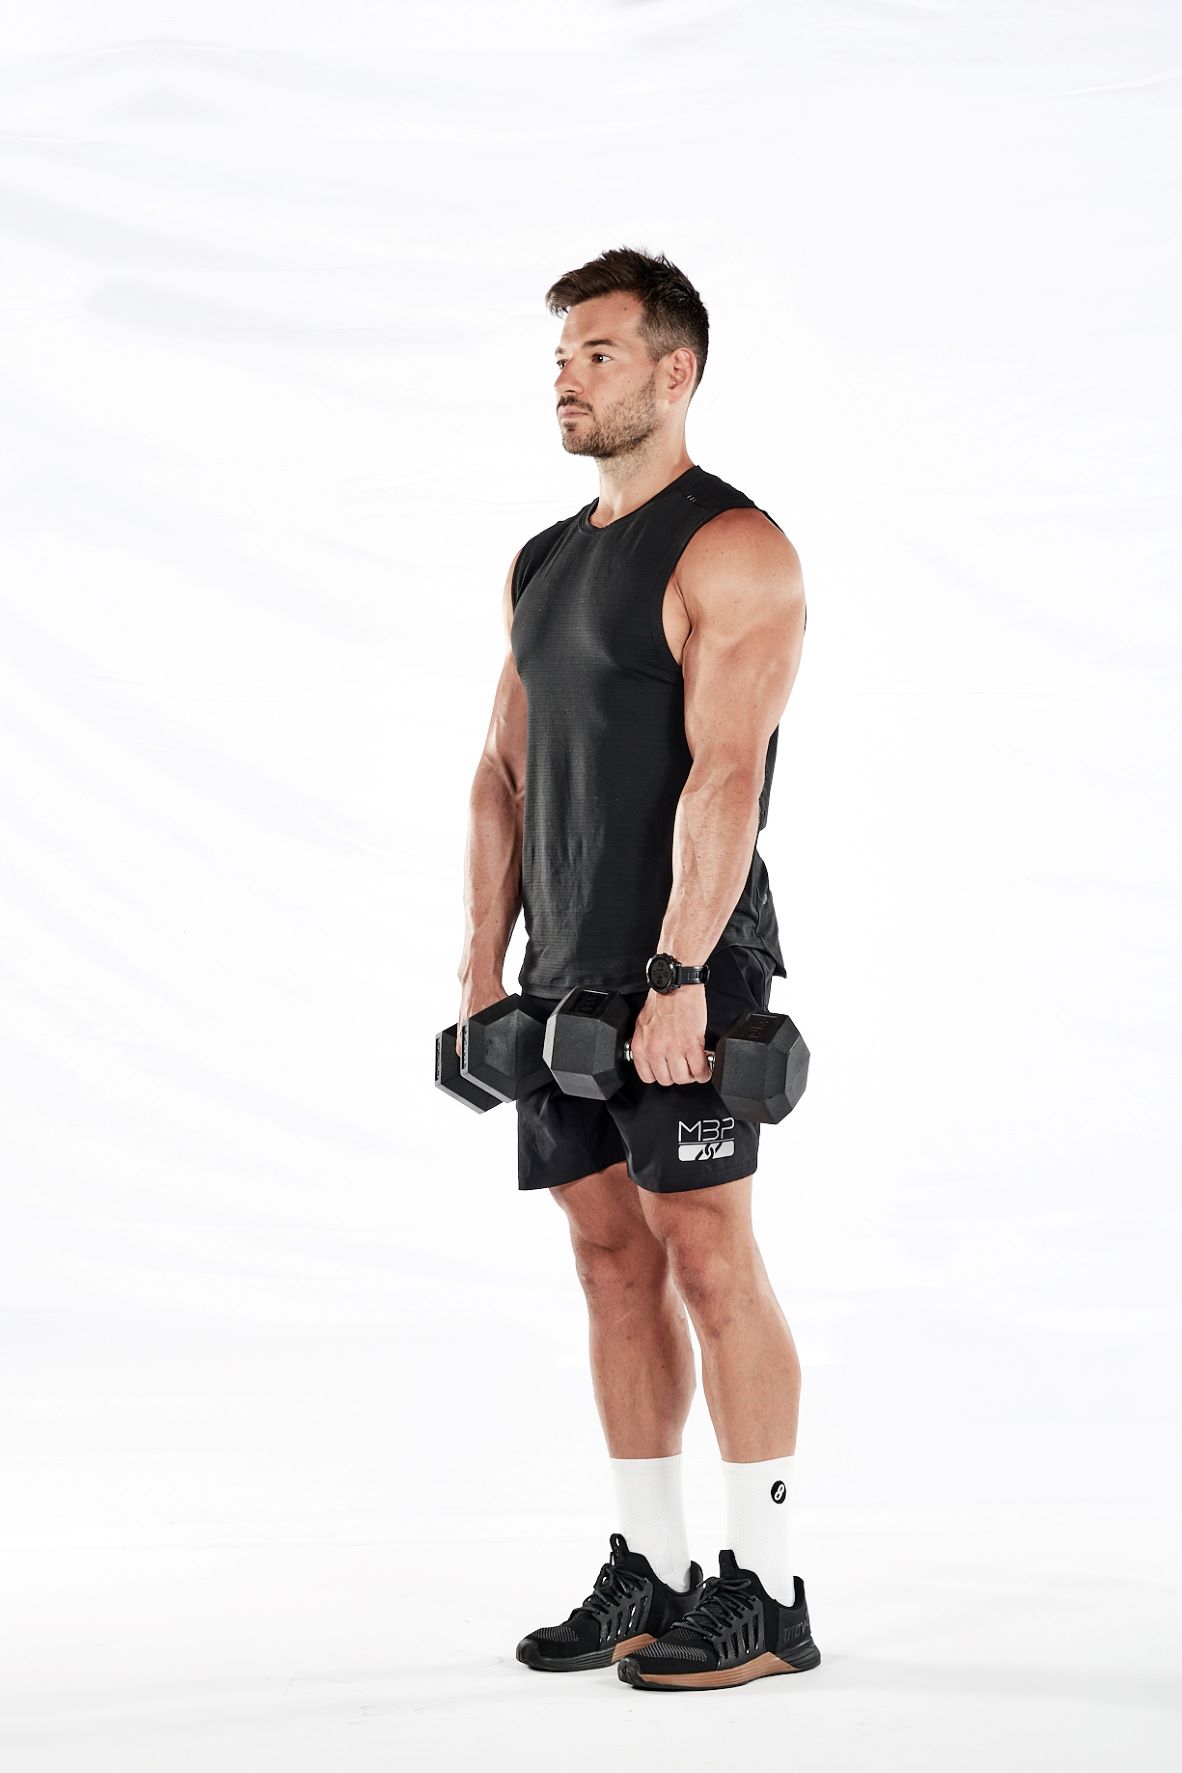 Two stages of the dumbbell deadlift – standing with feet hip-width apart, weights by the hips; leaning and bending the knees to lower dumbbells close to the floor.